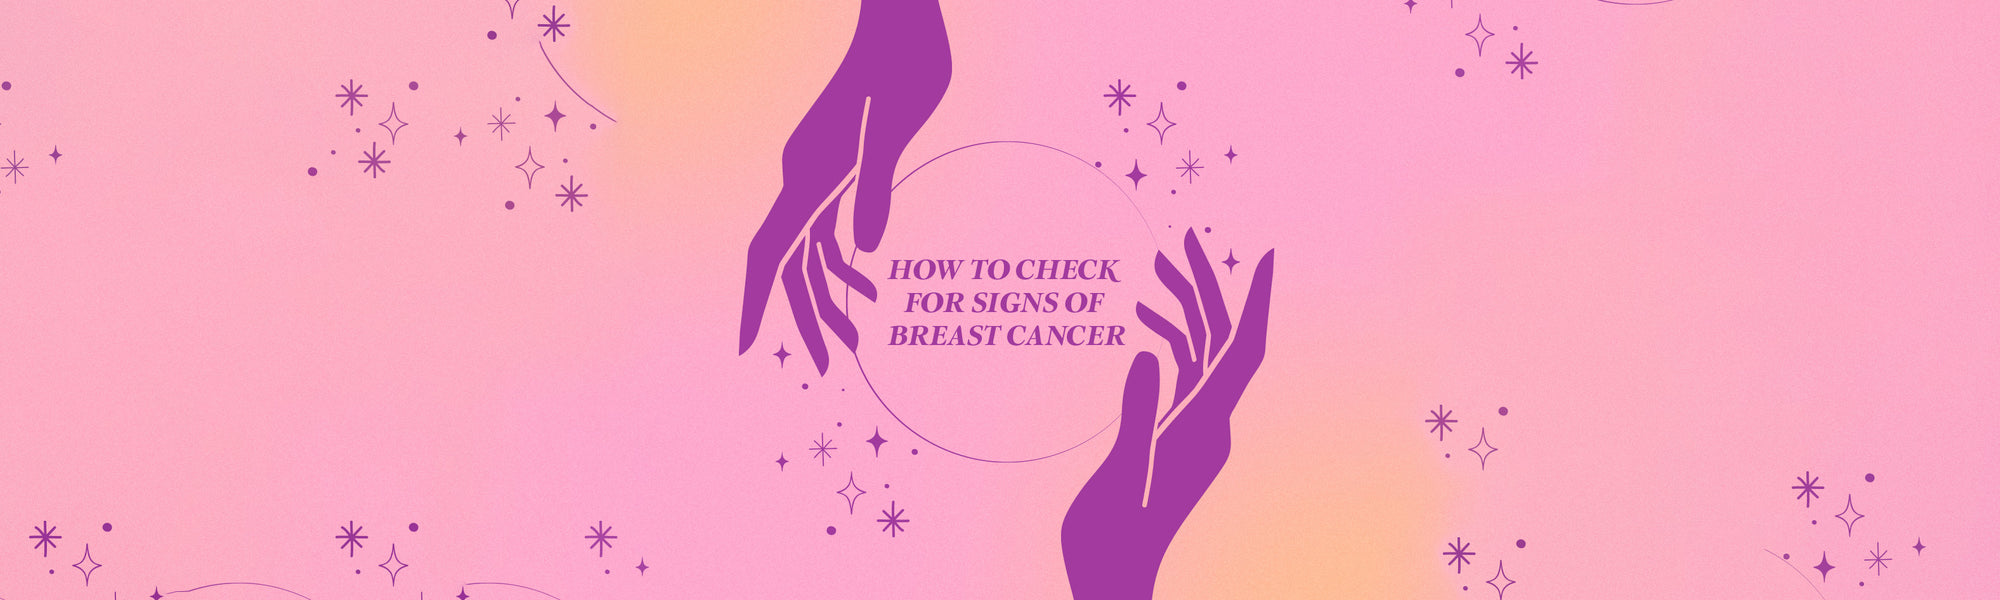 How to Check for Signs of Breast Cancer